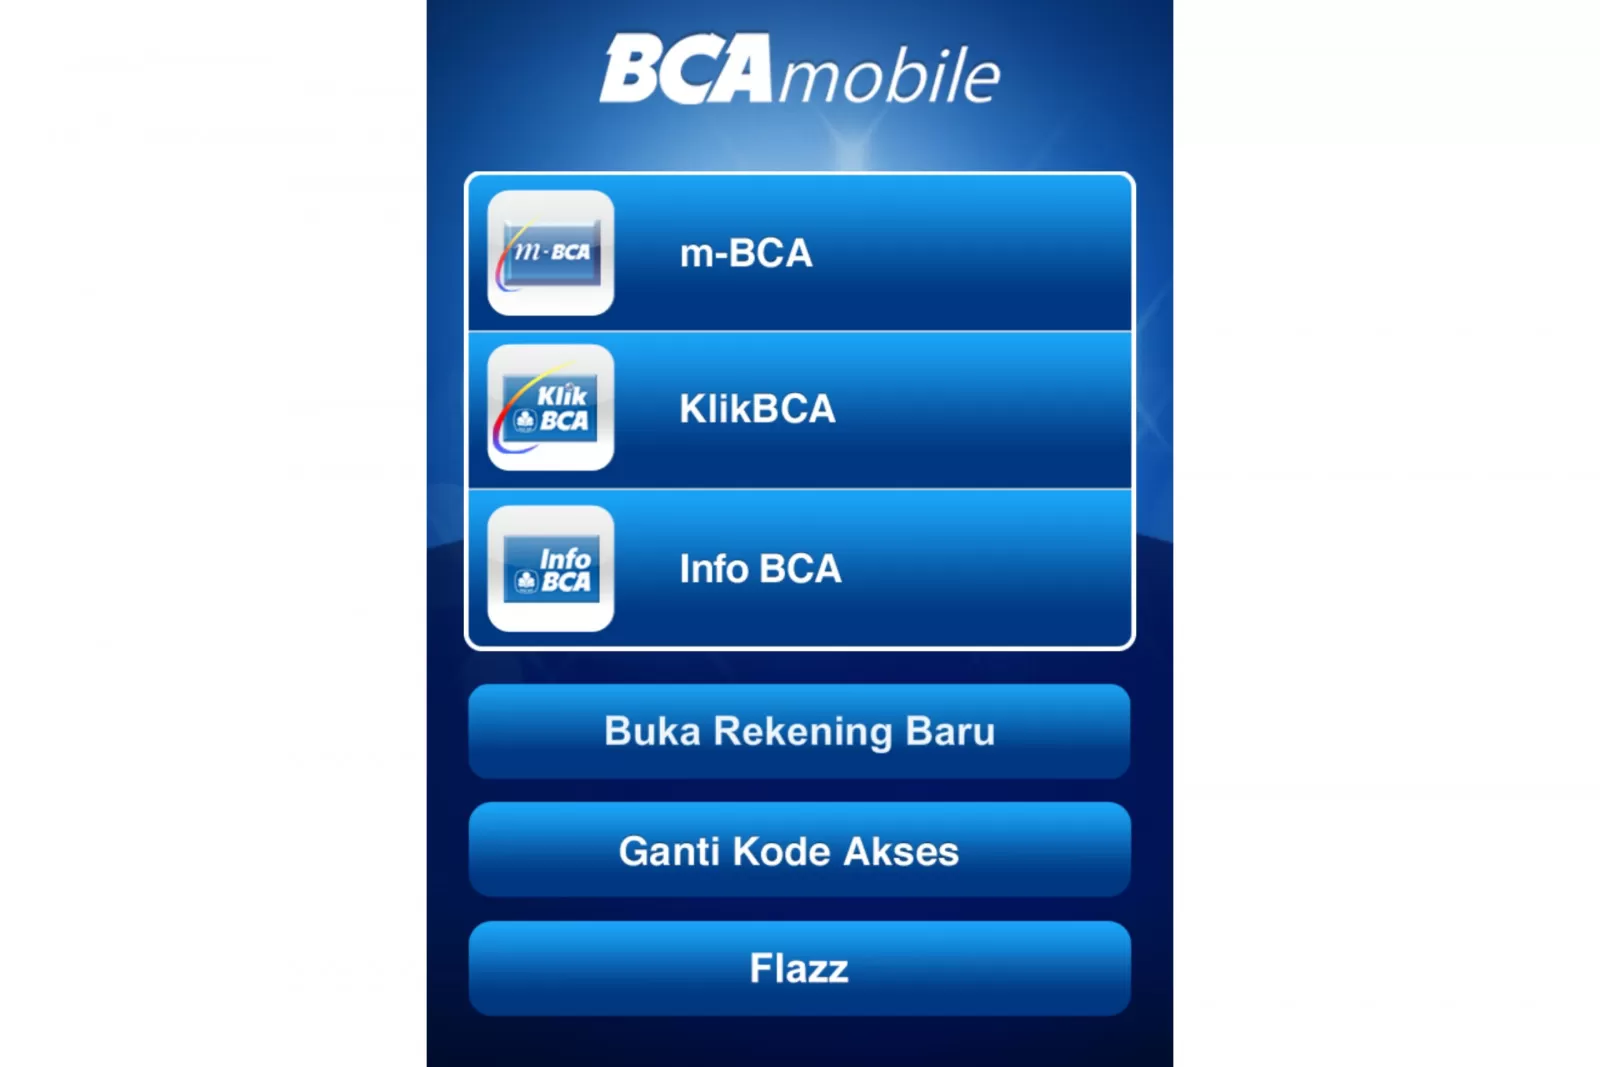  A screenshot of the BCA mobile banking app showing the option to pay for tolls using the app.